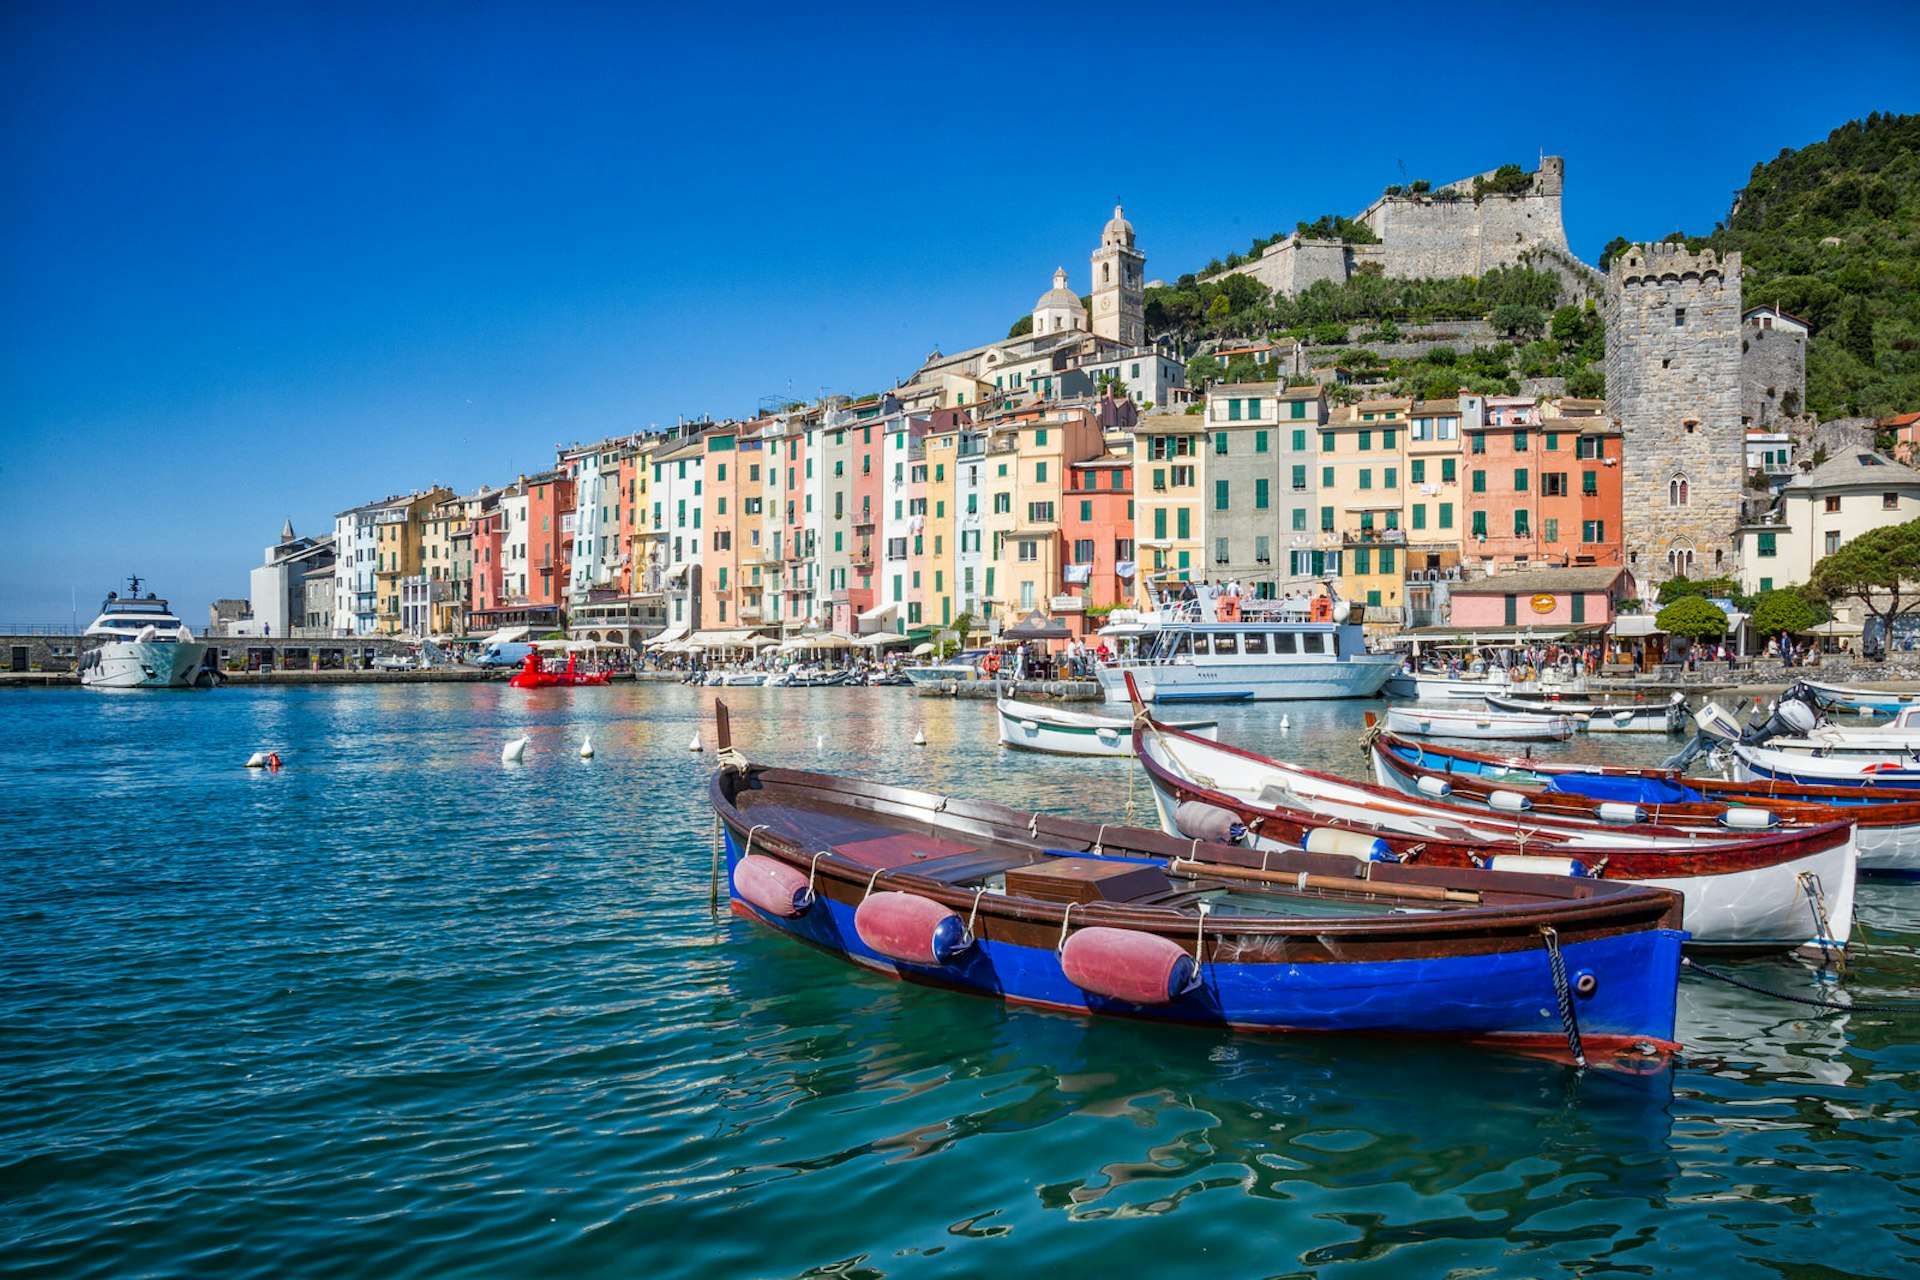 Small boats bob on the sparkling water, whilst the town of Porto Venere rises in the background, topped by a castle